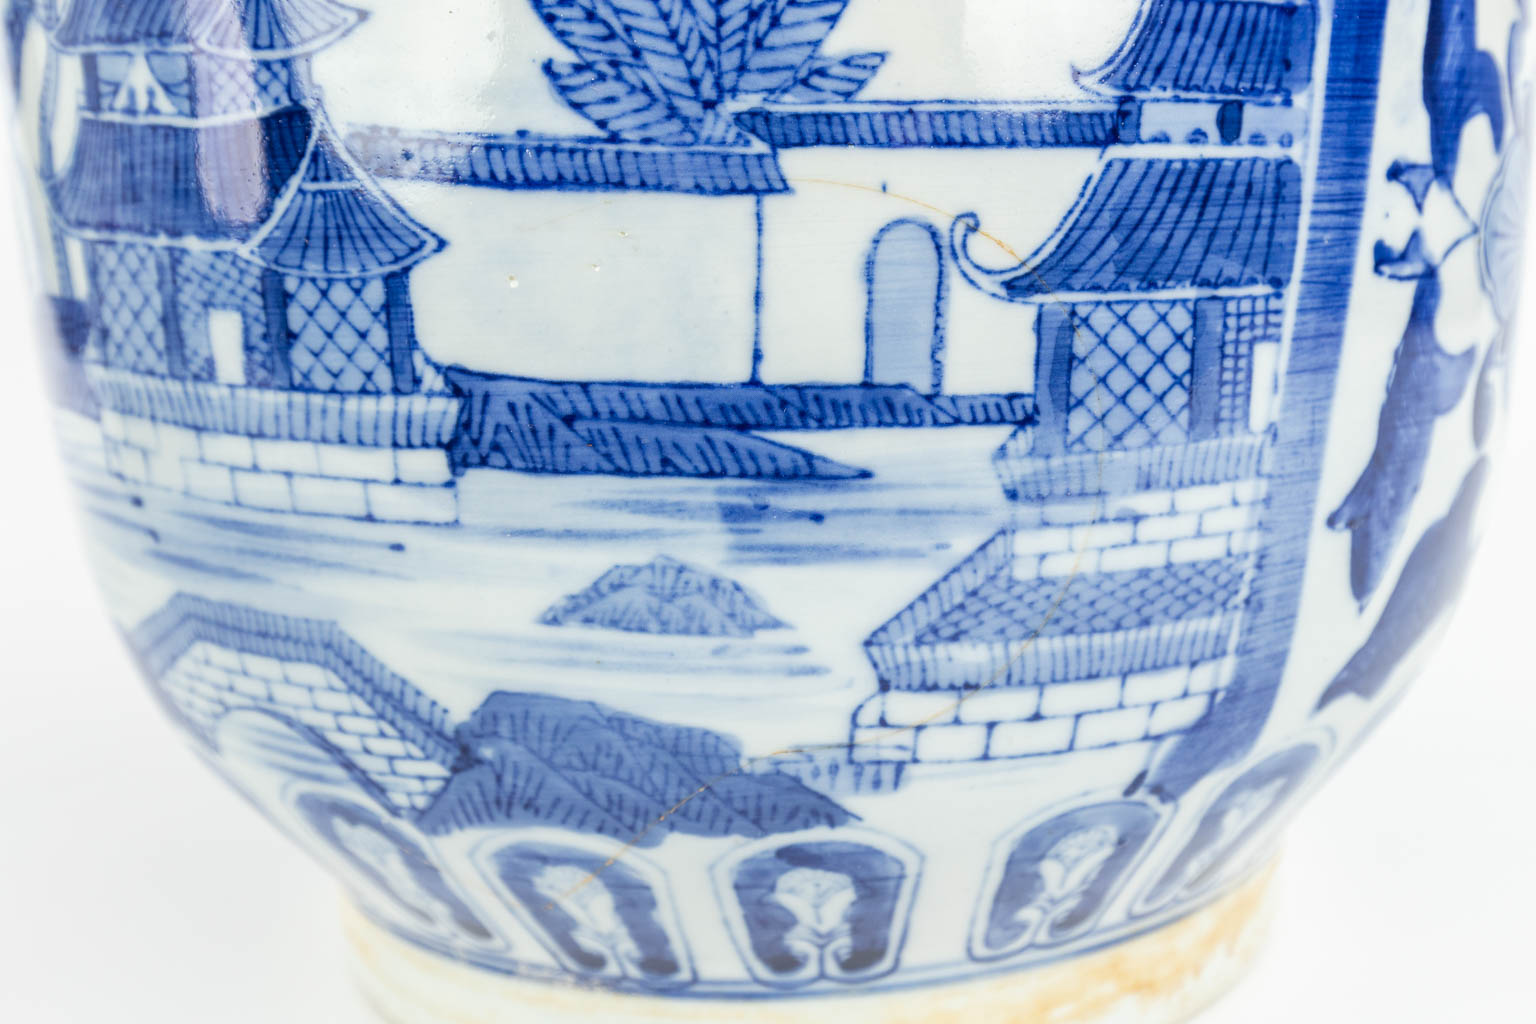 A set of 2 Chinese cache-pots made of porcelain of which 1 has a blue-white decor and the other a decor of peacocks. (H:35cm)